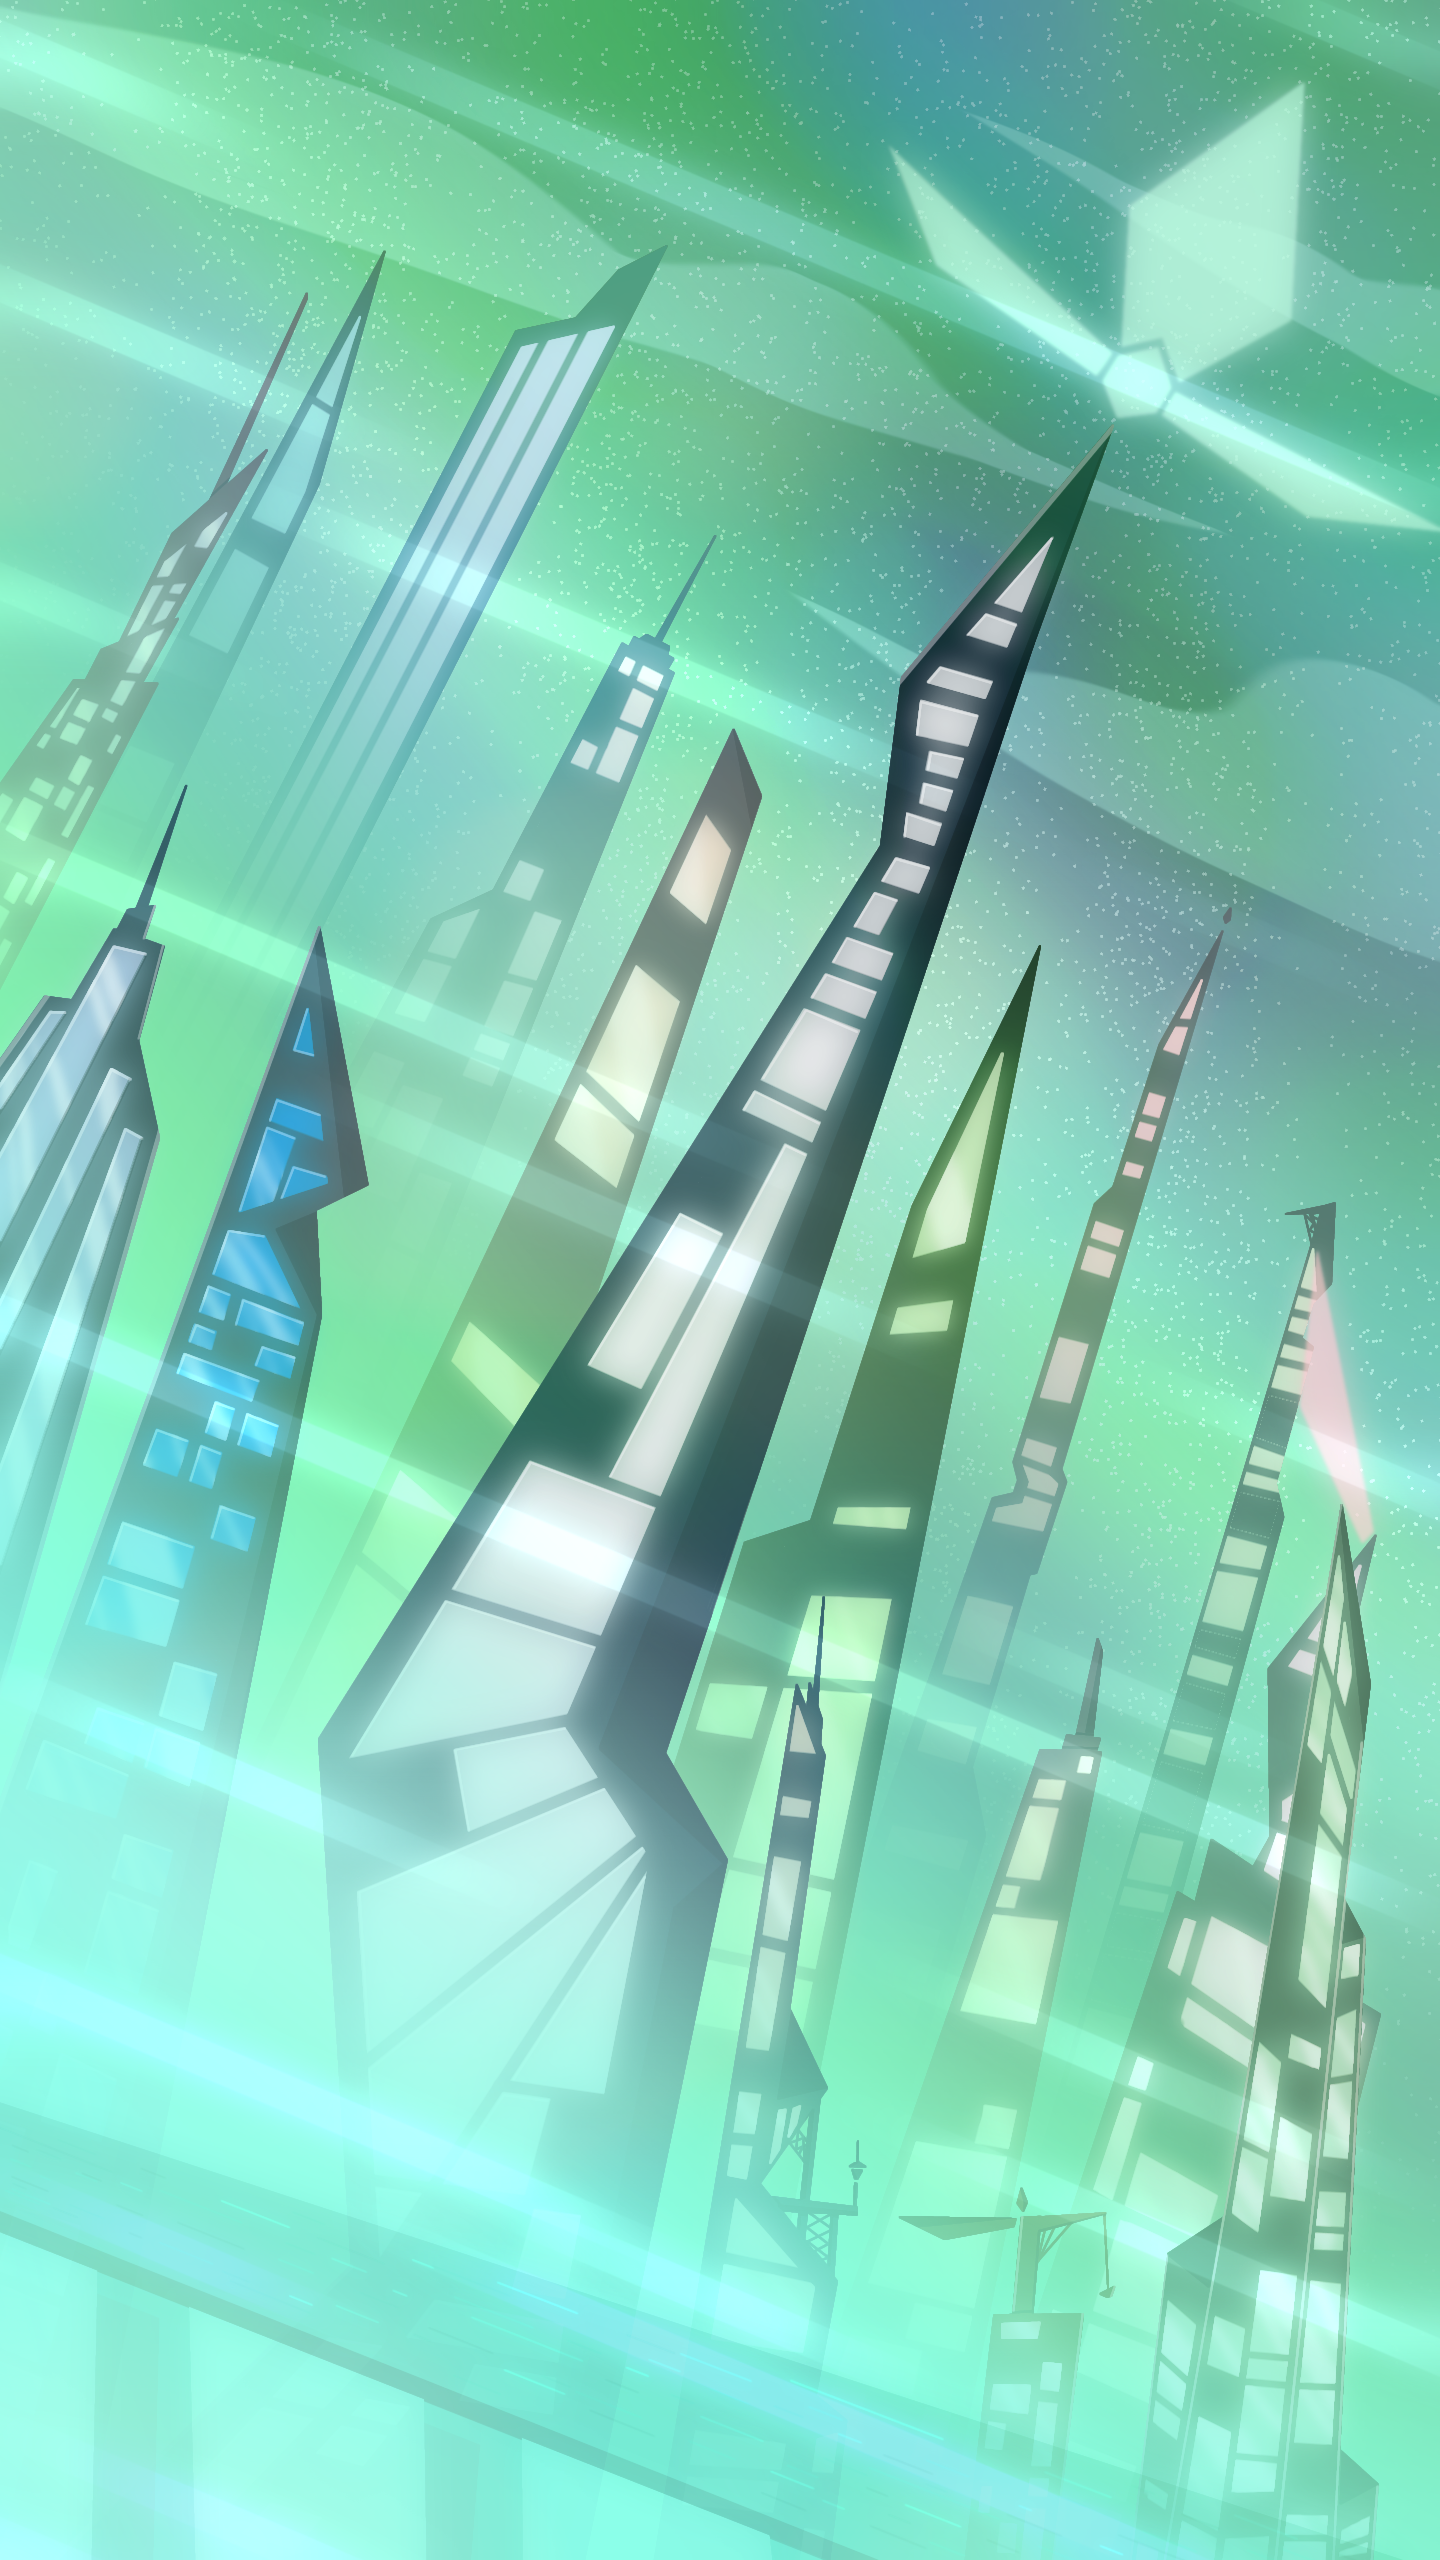 Neon City (Rolling Sky) by Untitledguy47 on DeviantArt